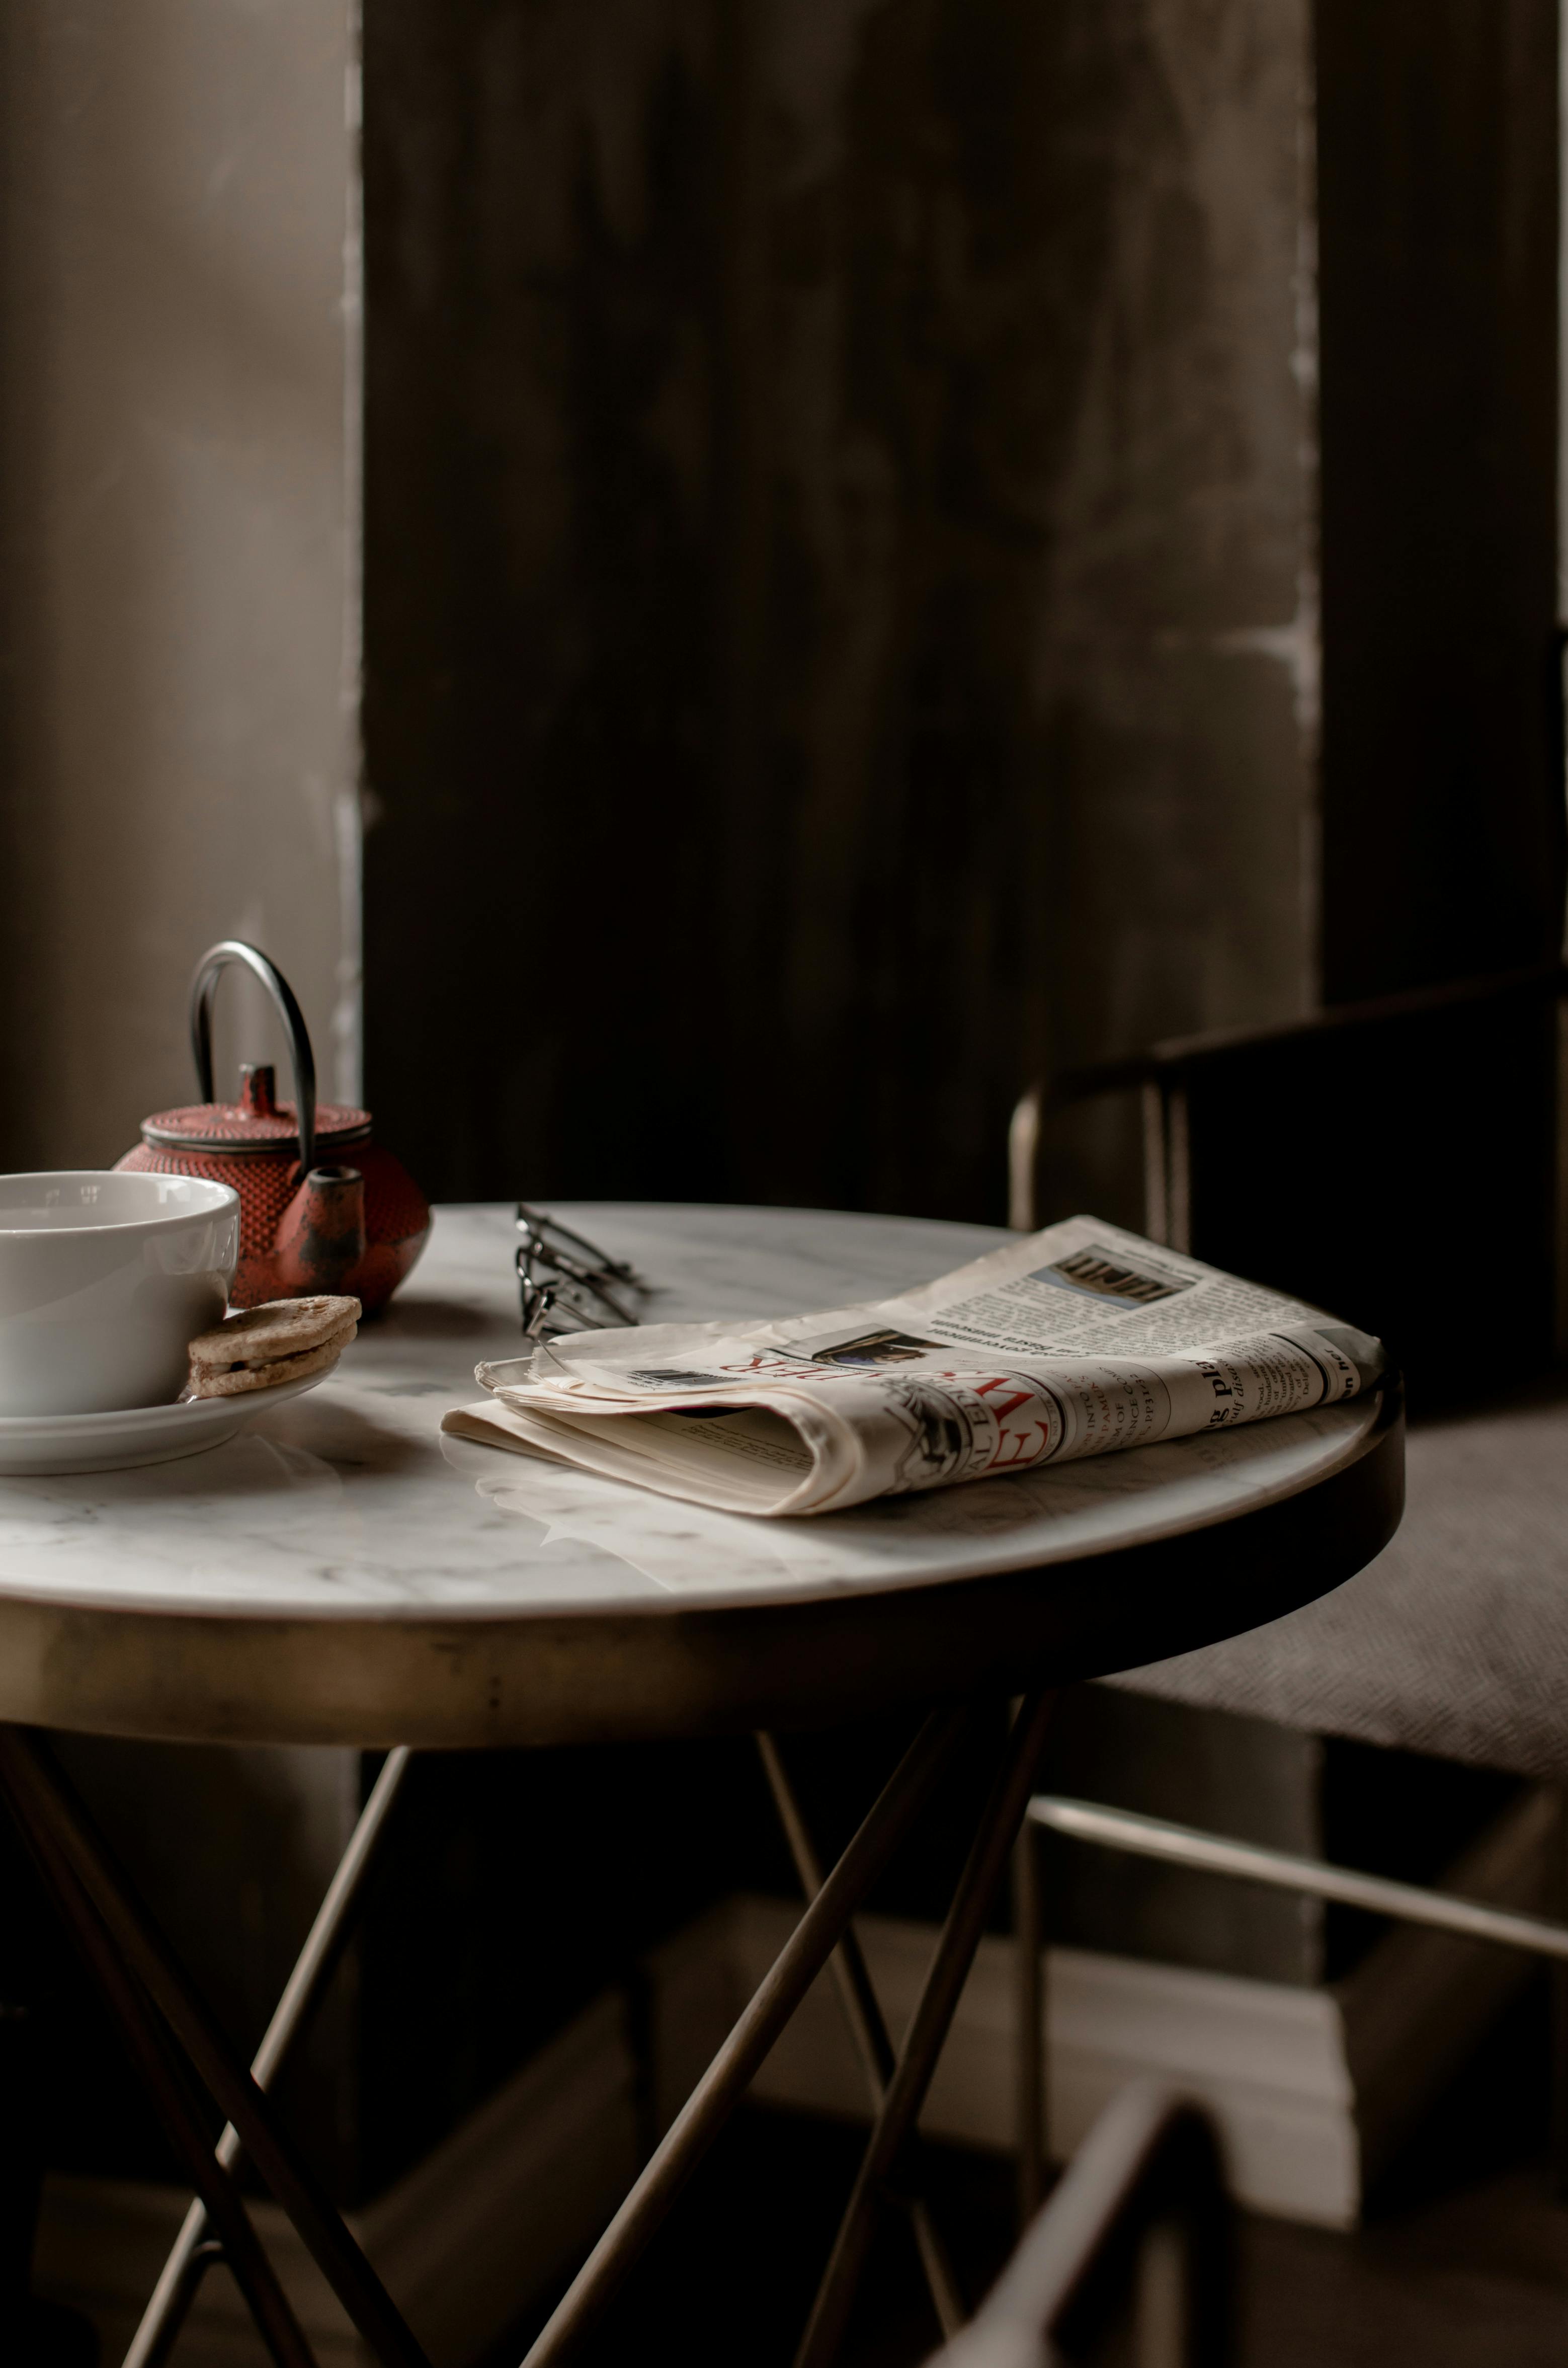 tea set and newspaper placed on round table near comfortable chair